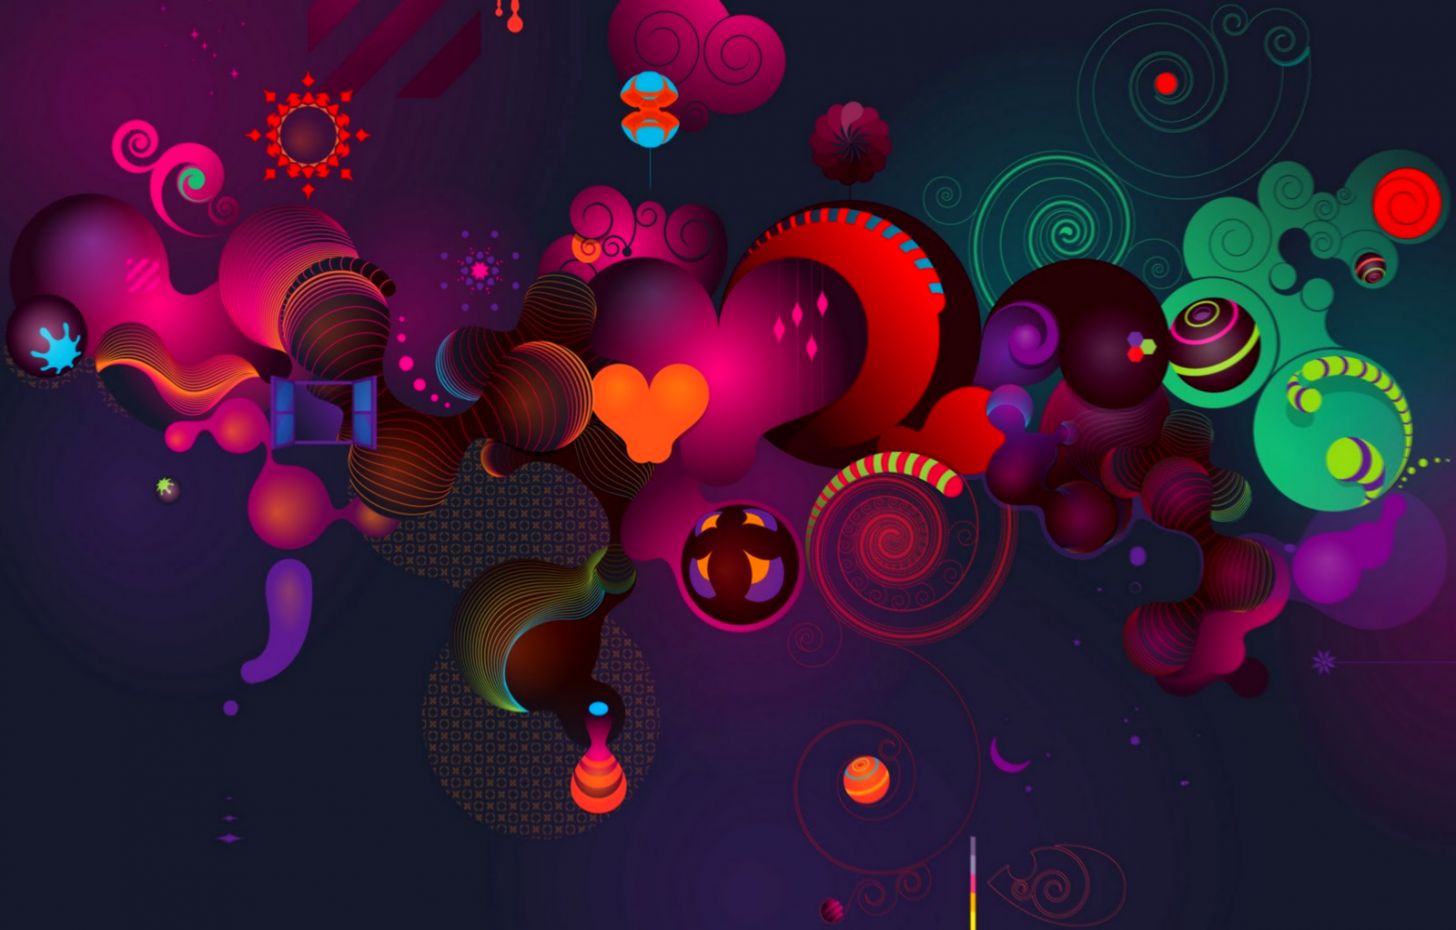 Qq Wallpapers Windows 7 Scenes - Abstract 3d Background Hd - HD Wallpaper 